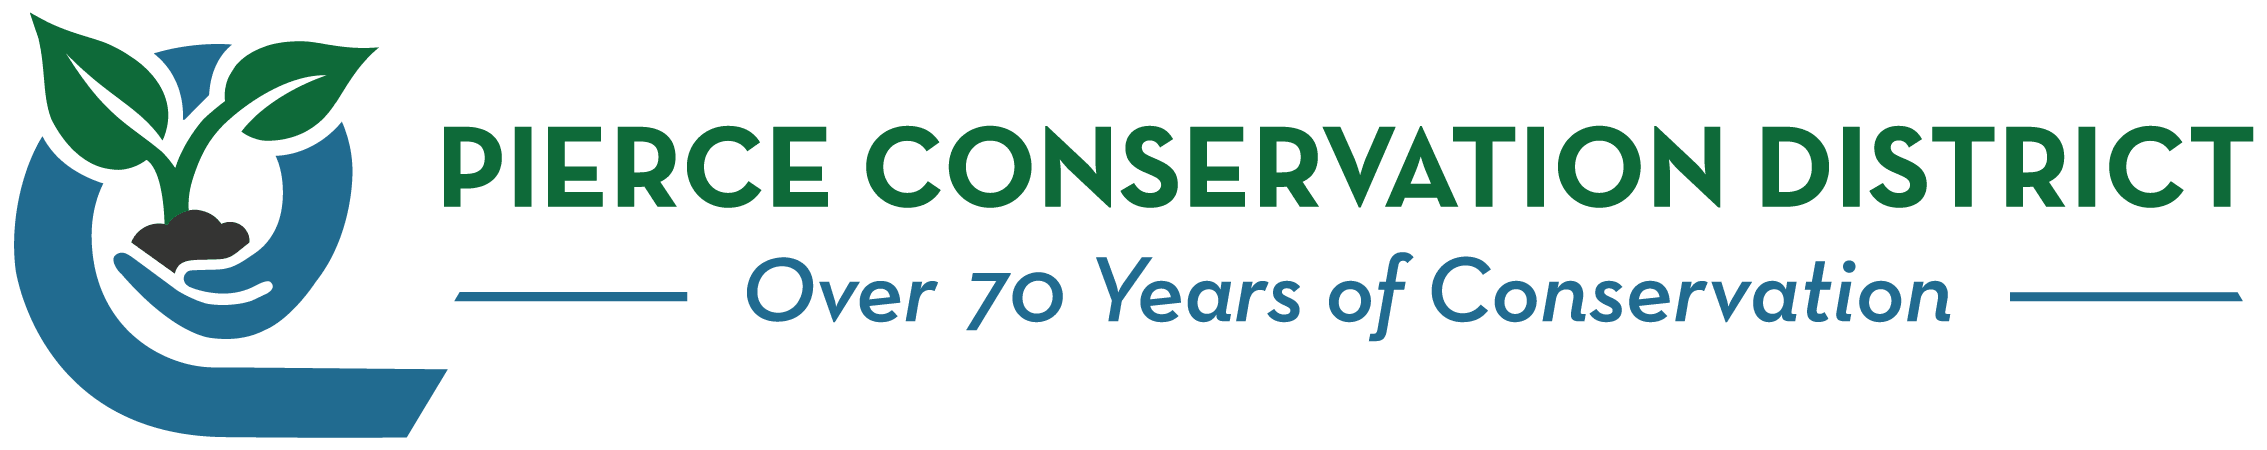 Pierce Conservation District logo with green and blue font